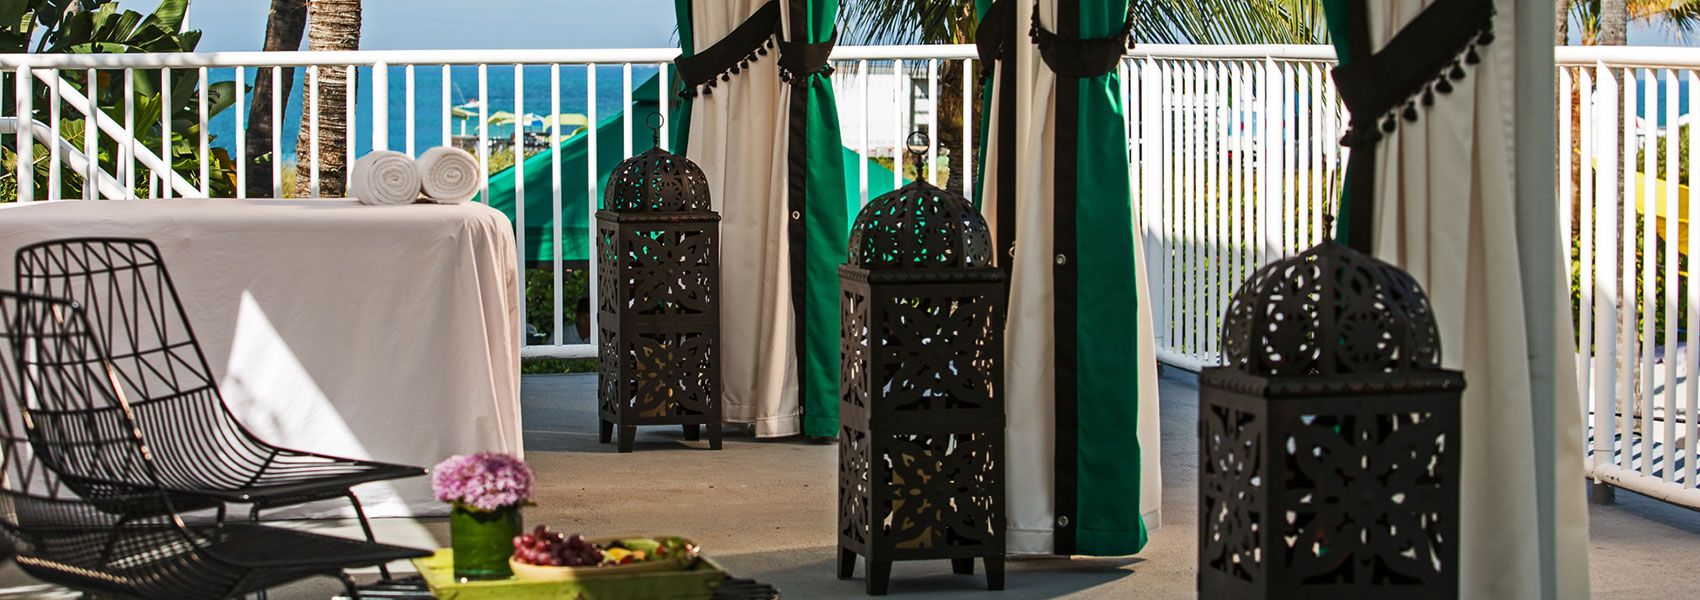 spa-like balconyy with morrocan style decor